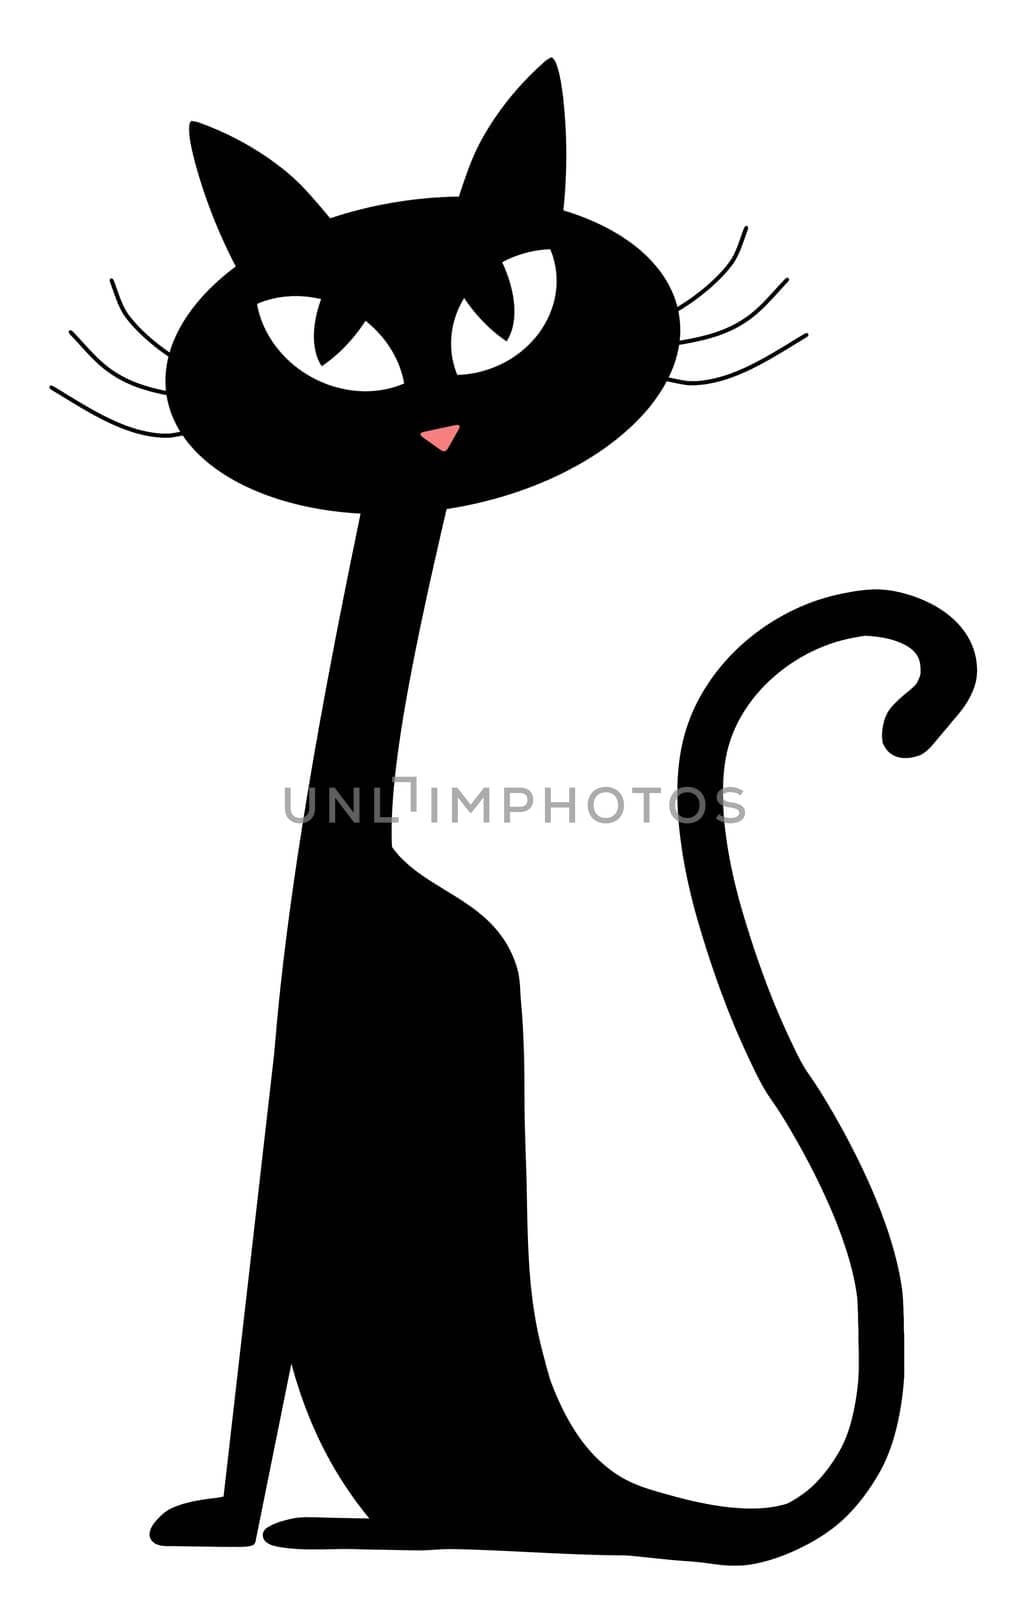 Illustration of an isolated Black cat